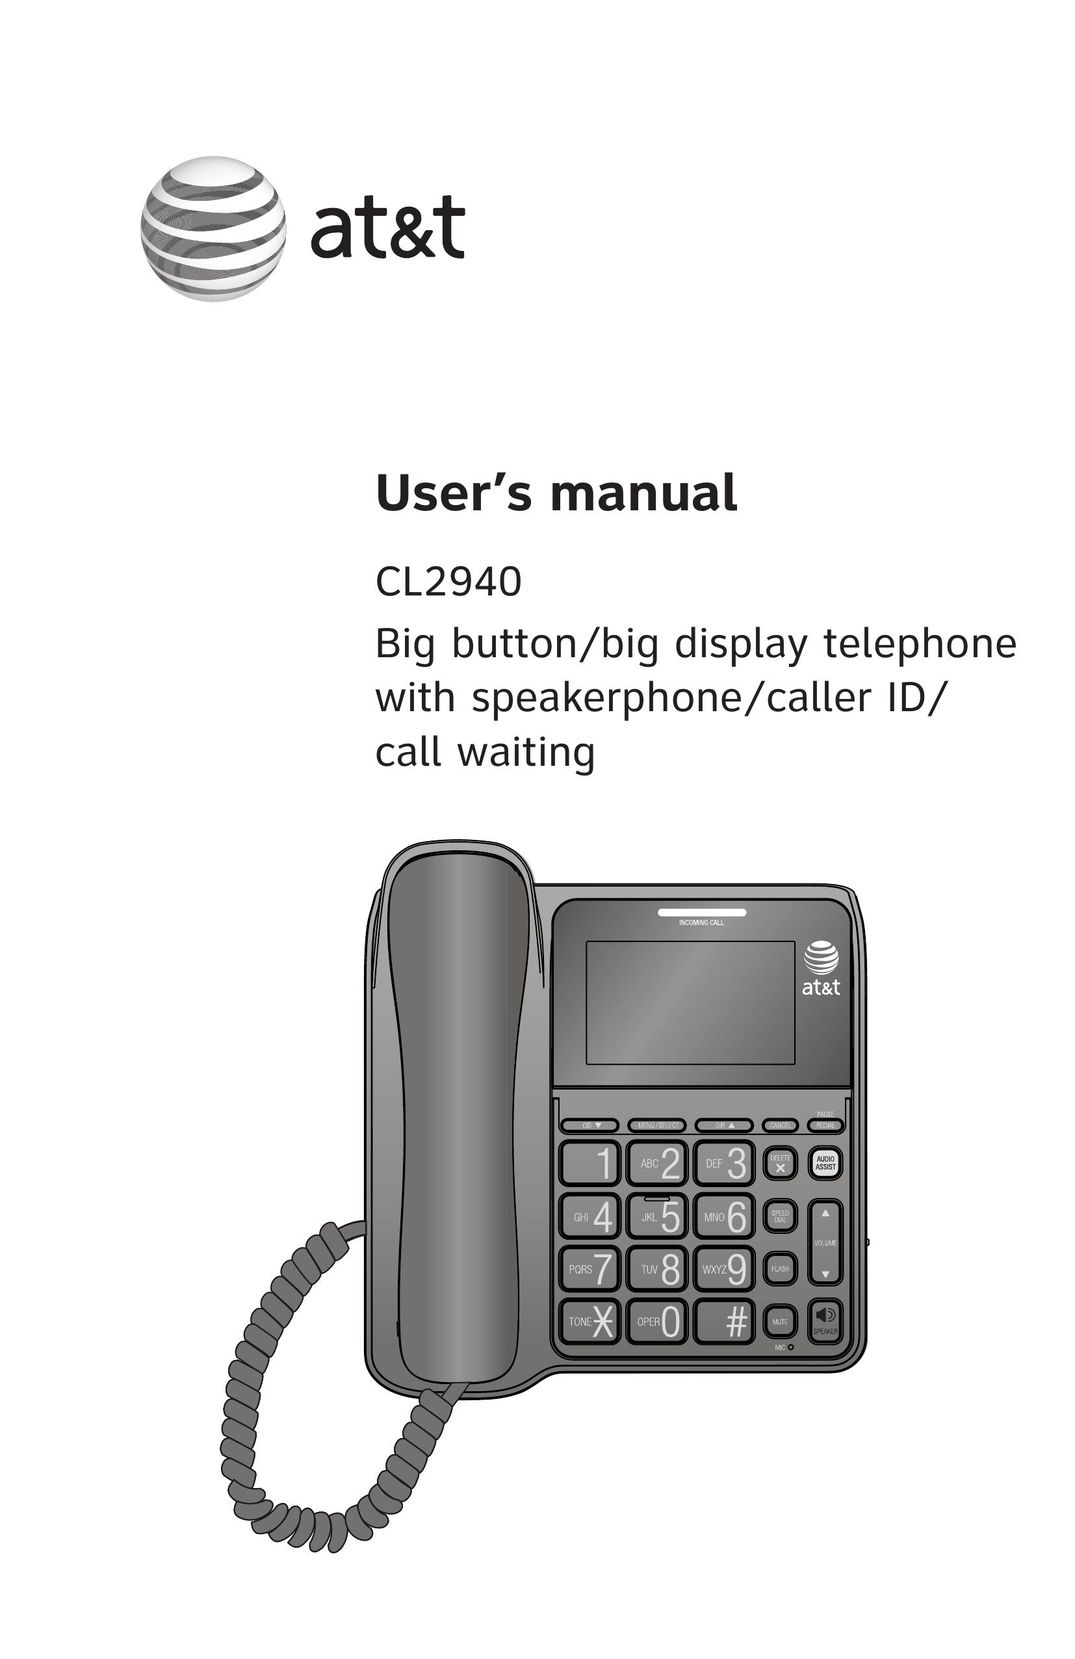 AT&T 210 BLK Conference Phone User Manual (Page 1)